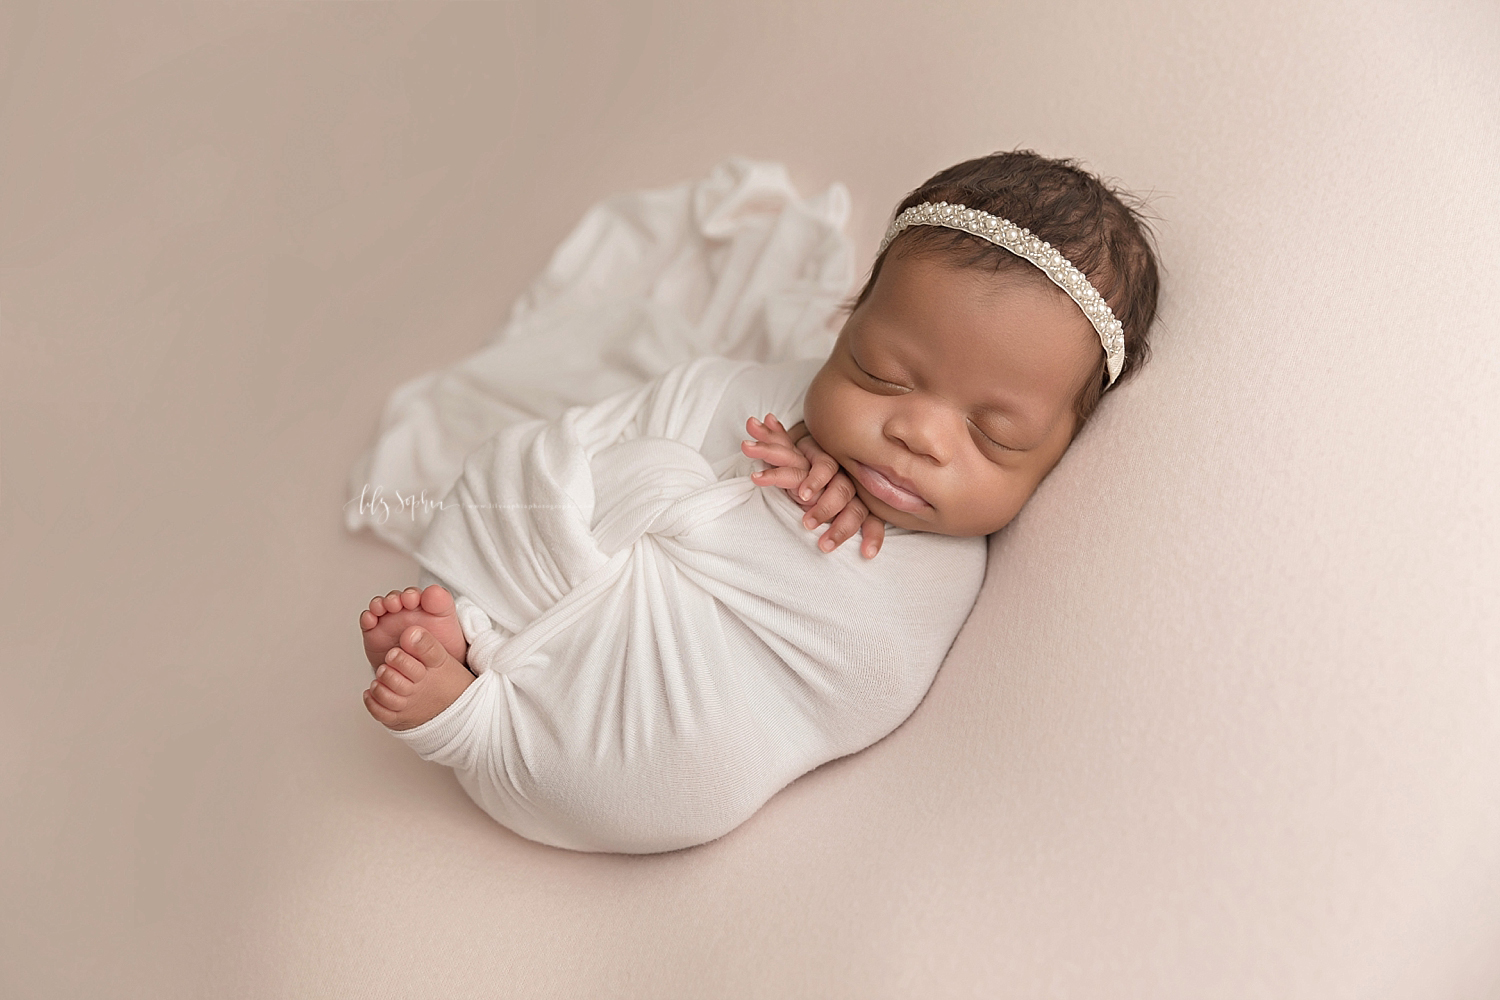  Image of an African American baby girl, wrapped with a white wrap with just her fingers and toes peeking out and a pearl tie back in her hair.  